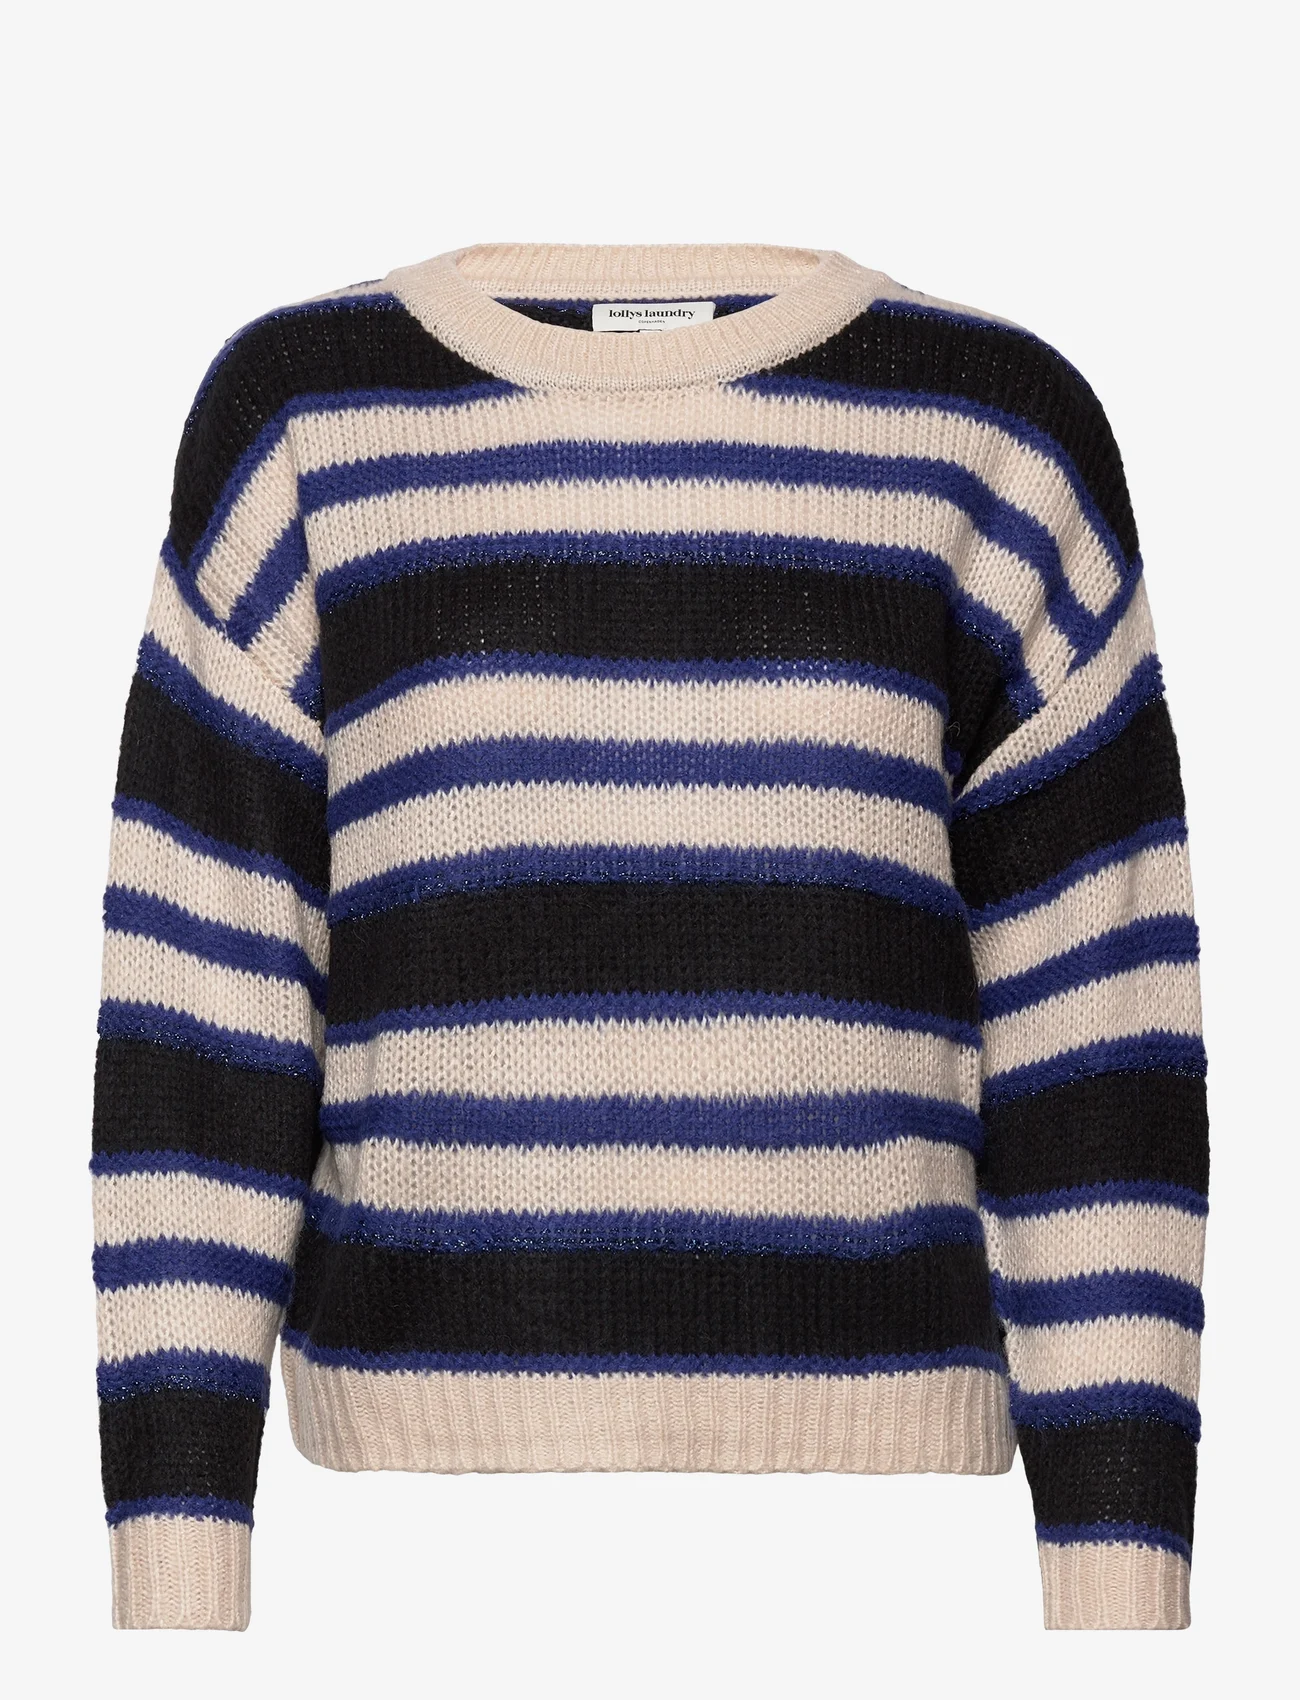 Lollys Laundry - Terry Jumper - pullover - 20 blue - 0